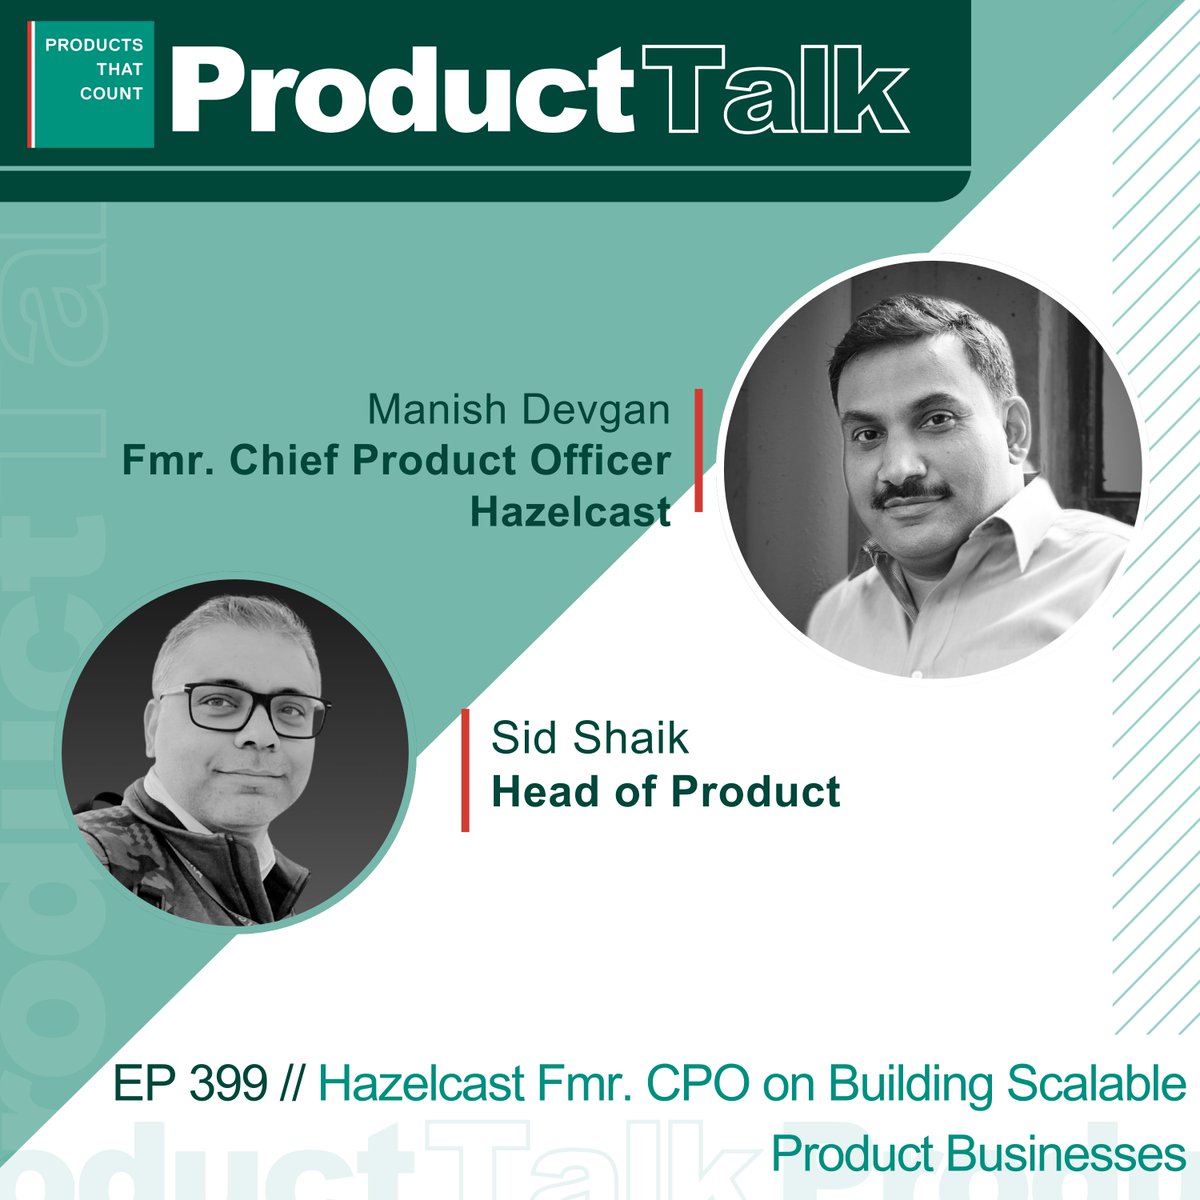 In the latest episode of Product Talk hosted by Sid Shaik, Hazelcast Fmr. CPO Manish Devgan shares lessons on scaling product businesses, including the importance of establishing a clear product vision and worldview. Tune in here: productsthatcount.com/hazelcast-cpo-…